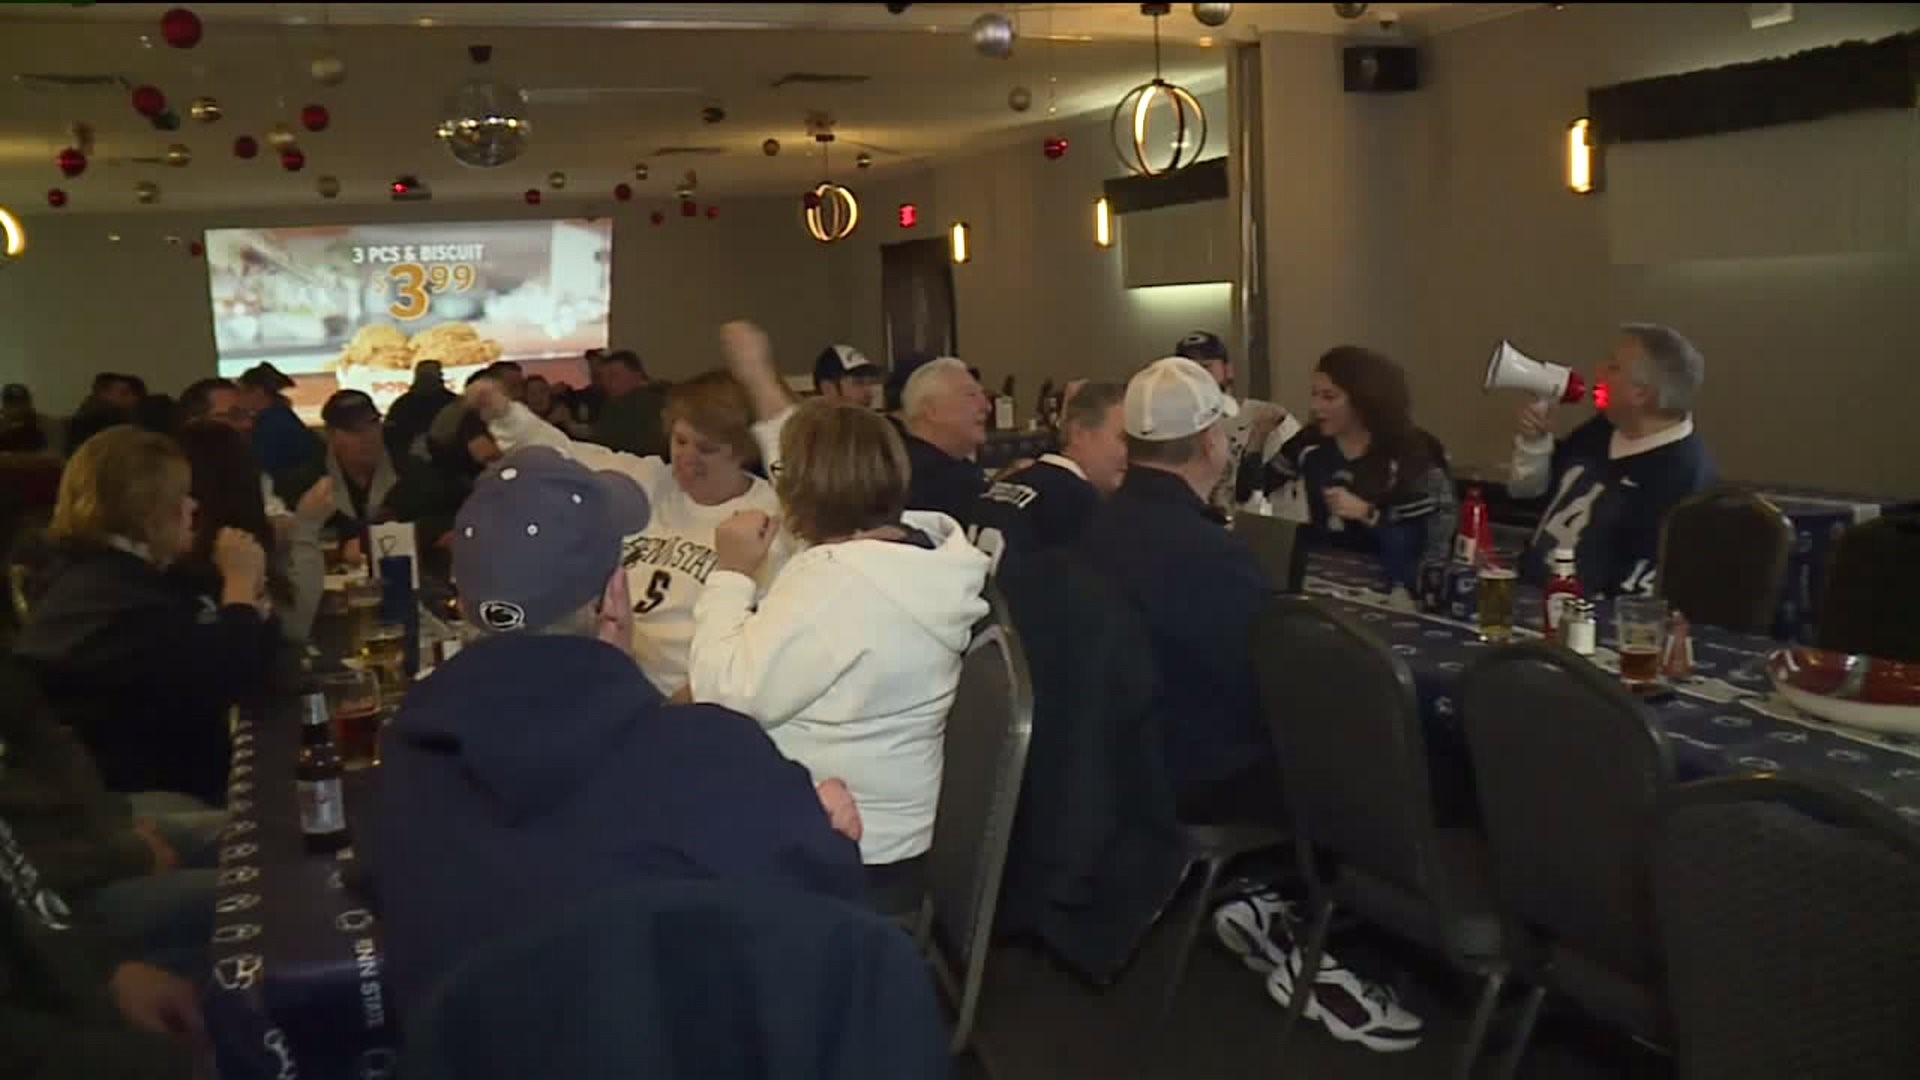 Penn State Fans Hit the Bars to Watch Citrus Bowl